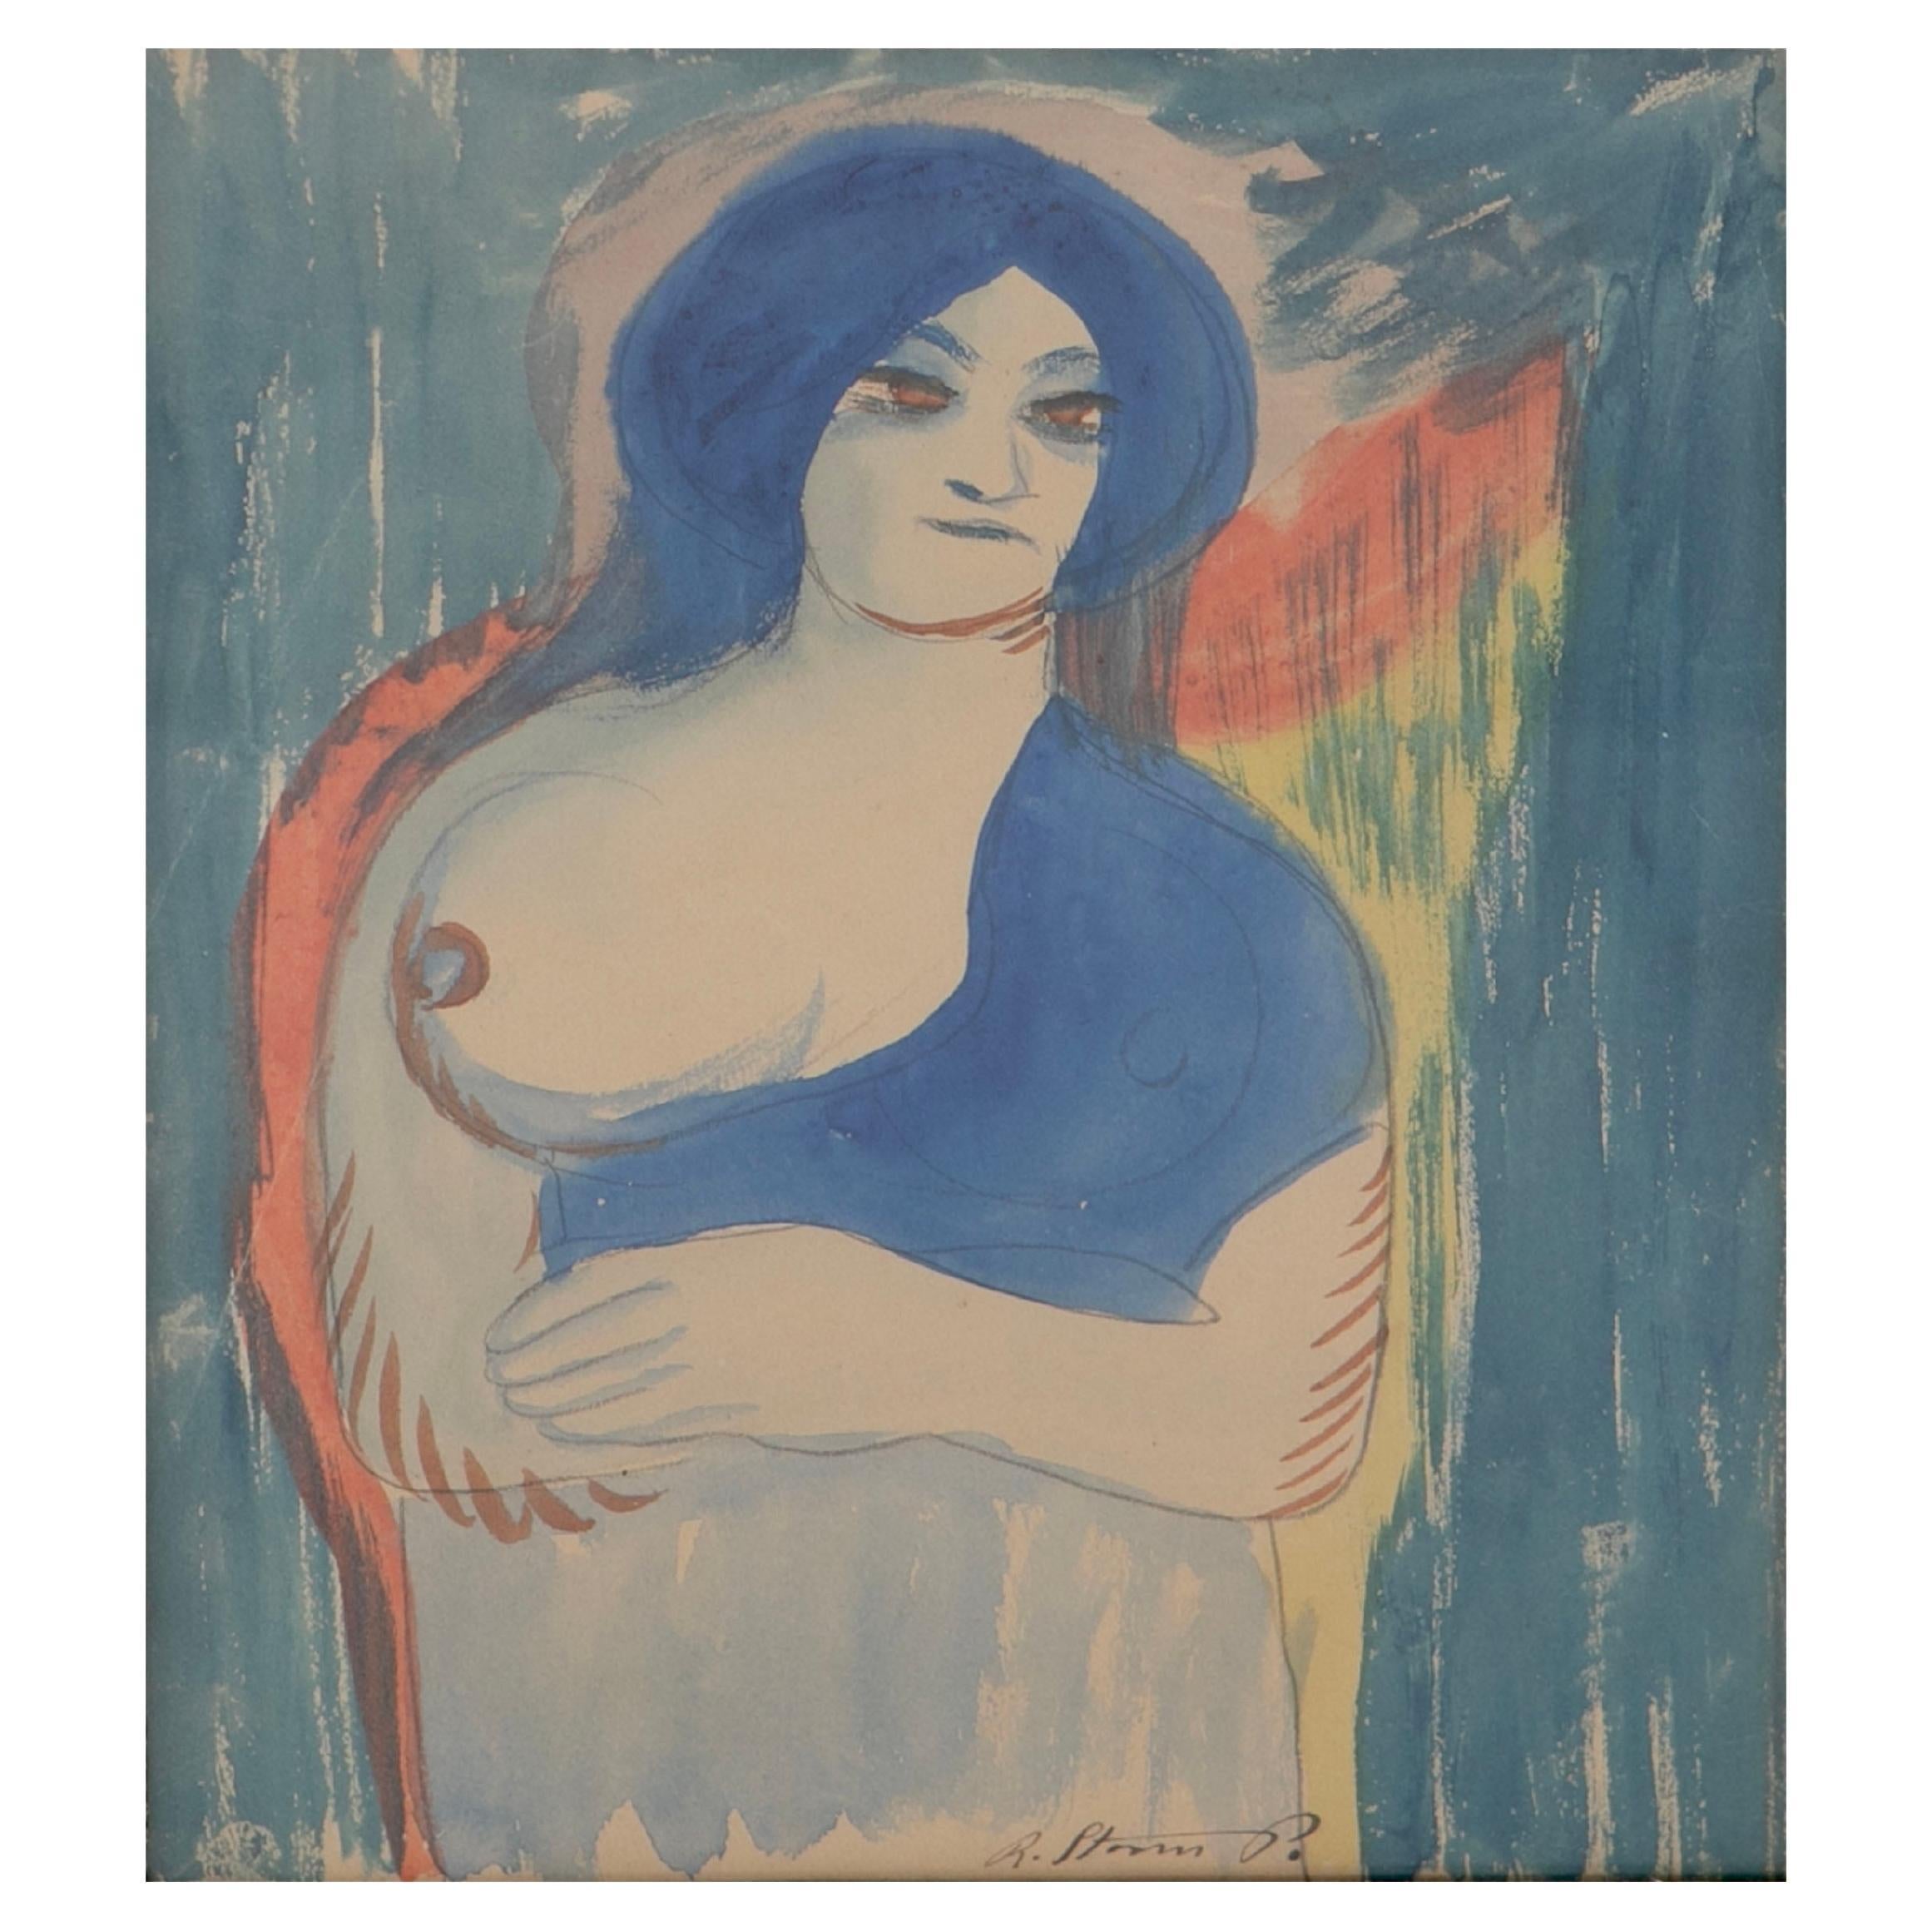 Robert Storm Petersen Framed watercolor painting. 'Woman with exposed breast'. For Sale